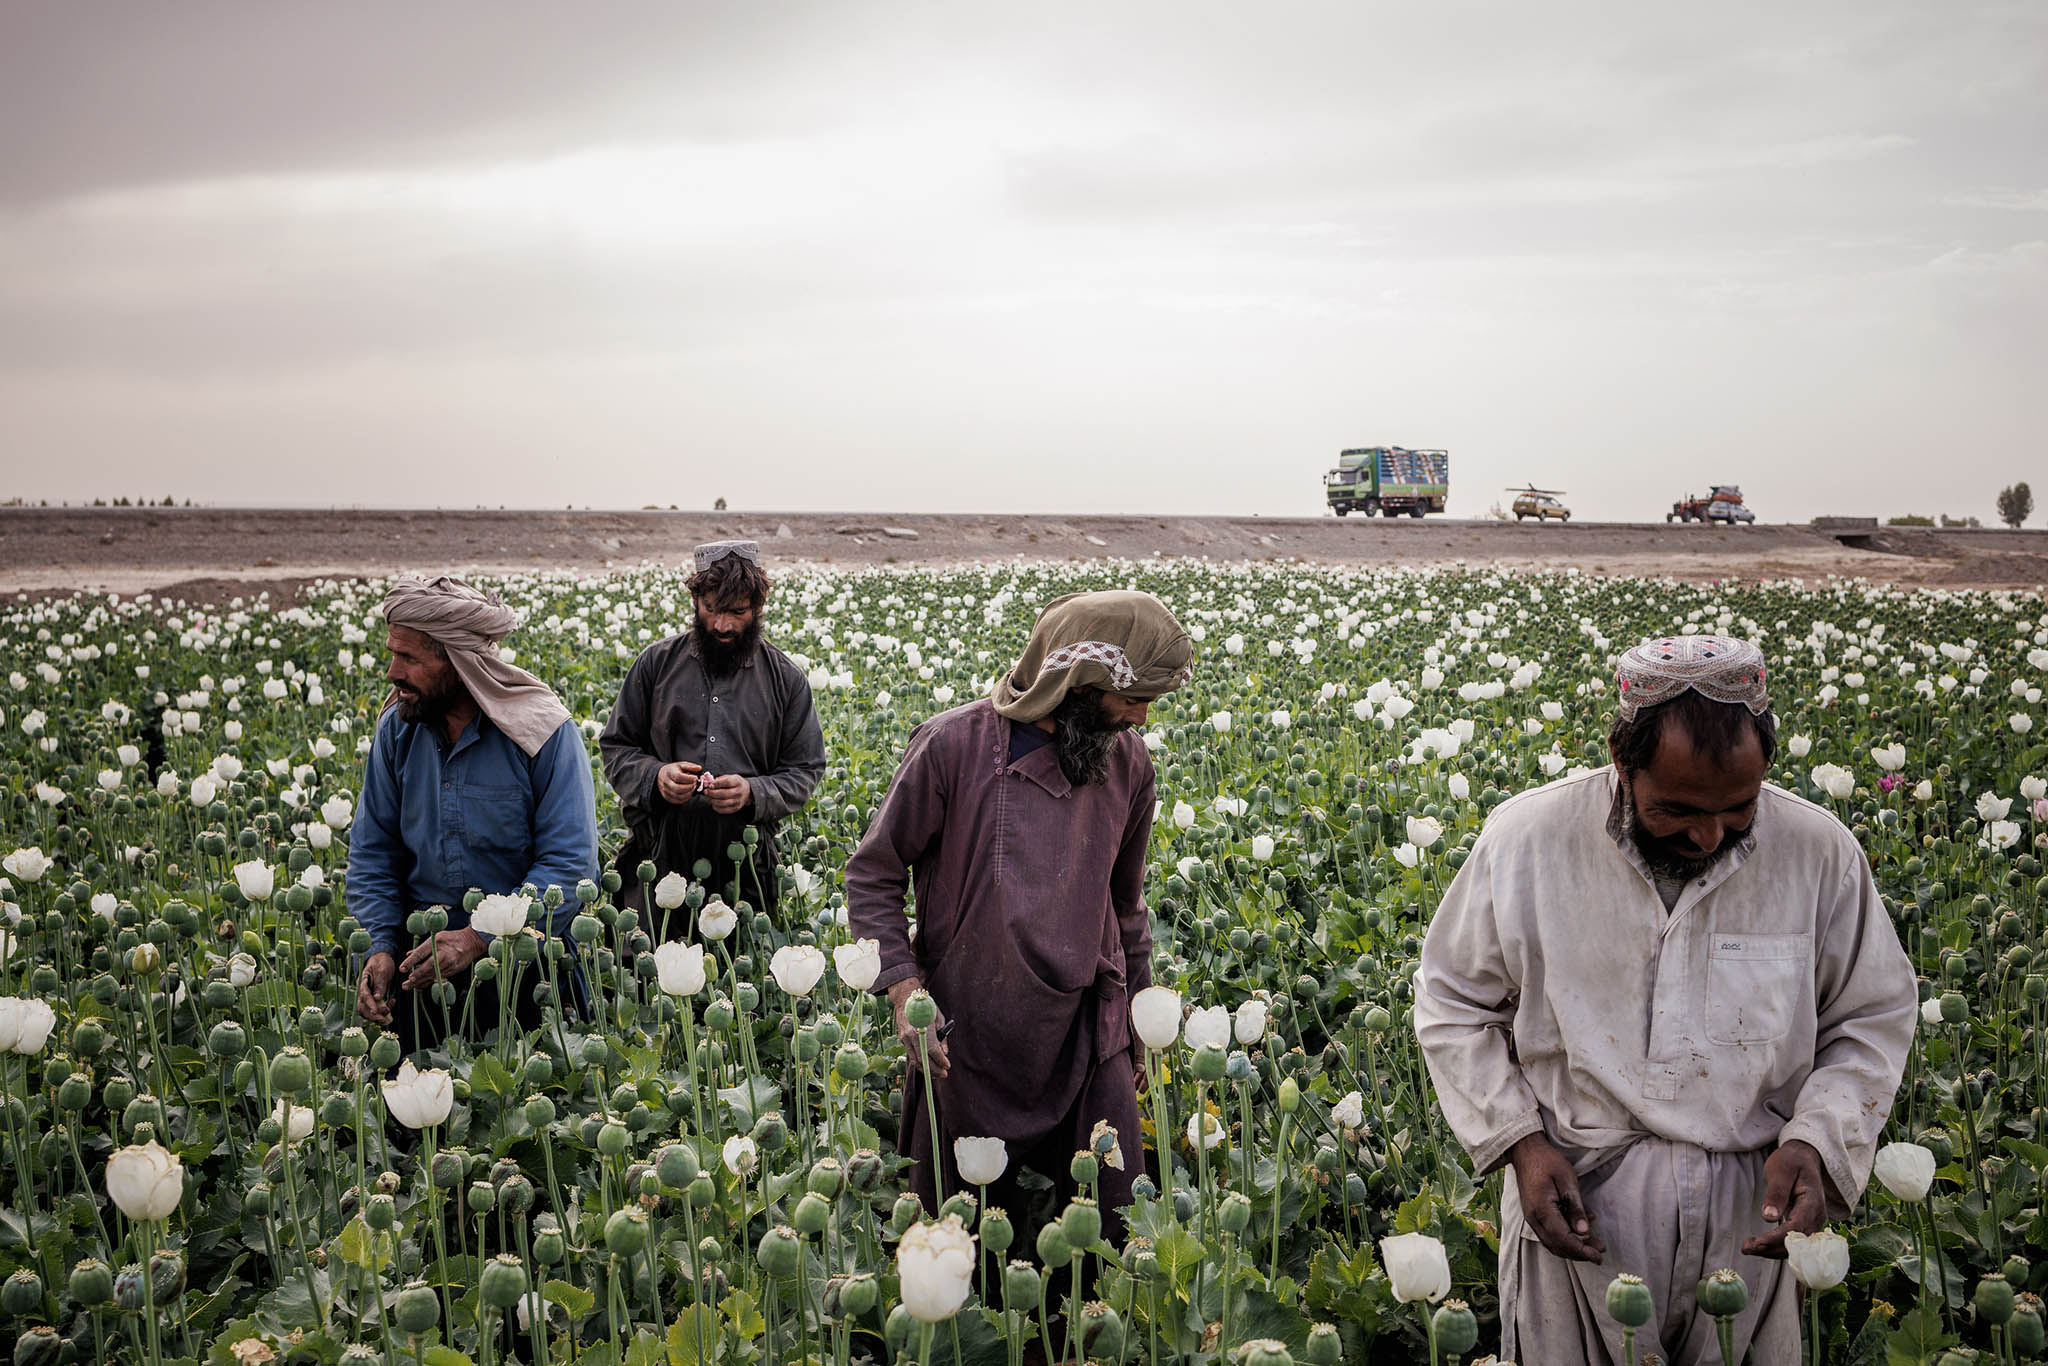 Farmers harvest opium from poppies in Maiwand, Afghanistan, Nov. 7, 2021. The Taliban announced on April 3, 2022, that cultivating opium poppy in Afghanistan was banned. (Jim Huylebroek/The New York Times)